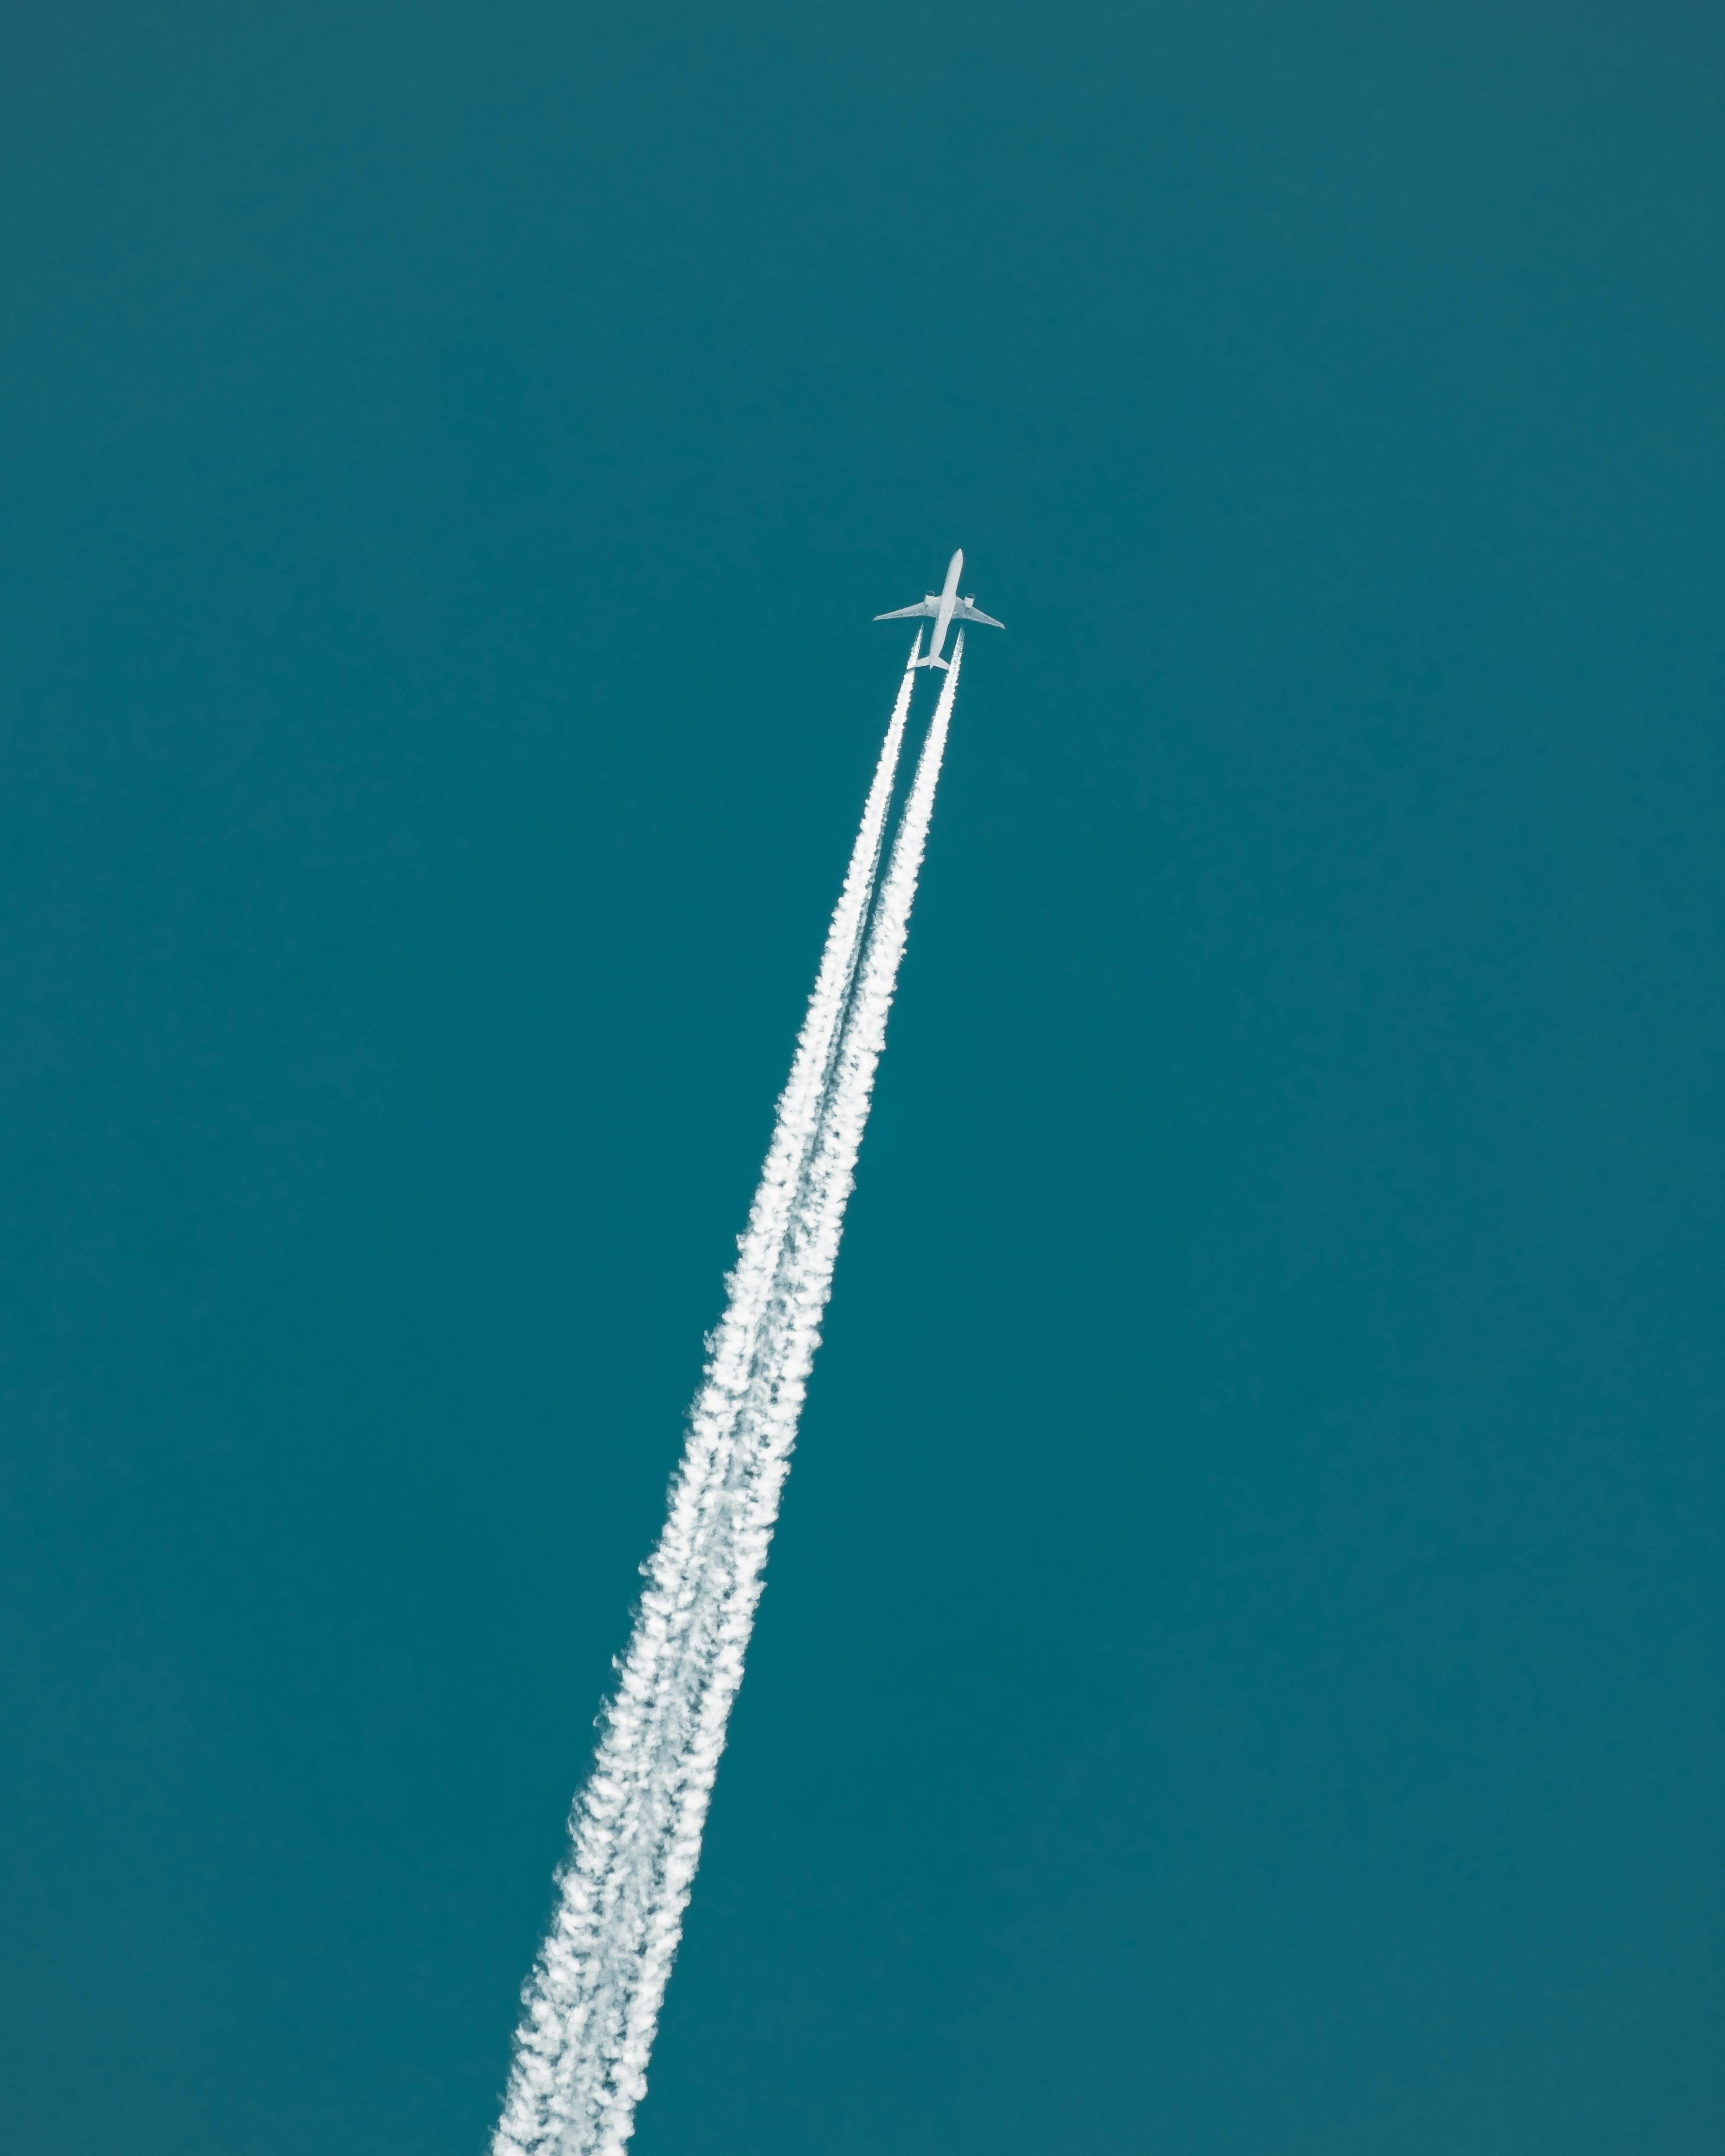 high-altitude-airplane-flying-with-contrails